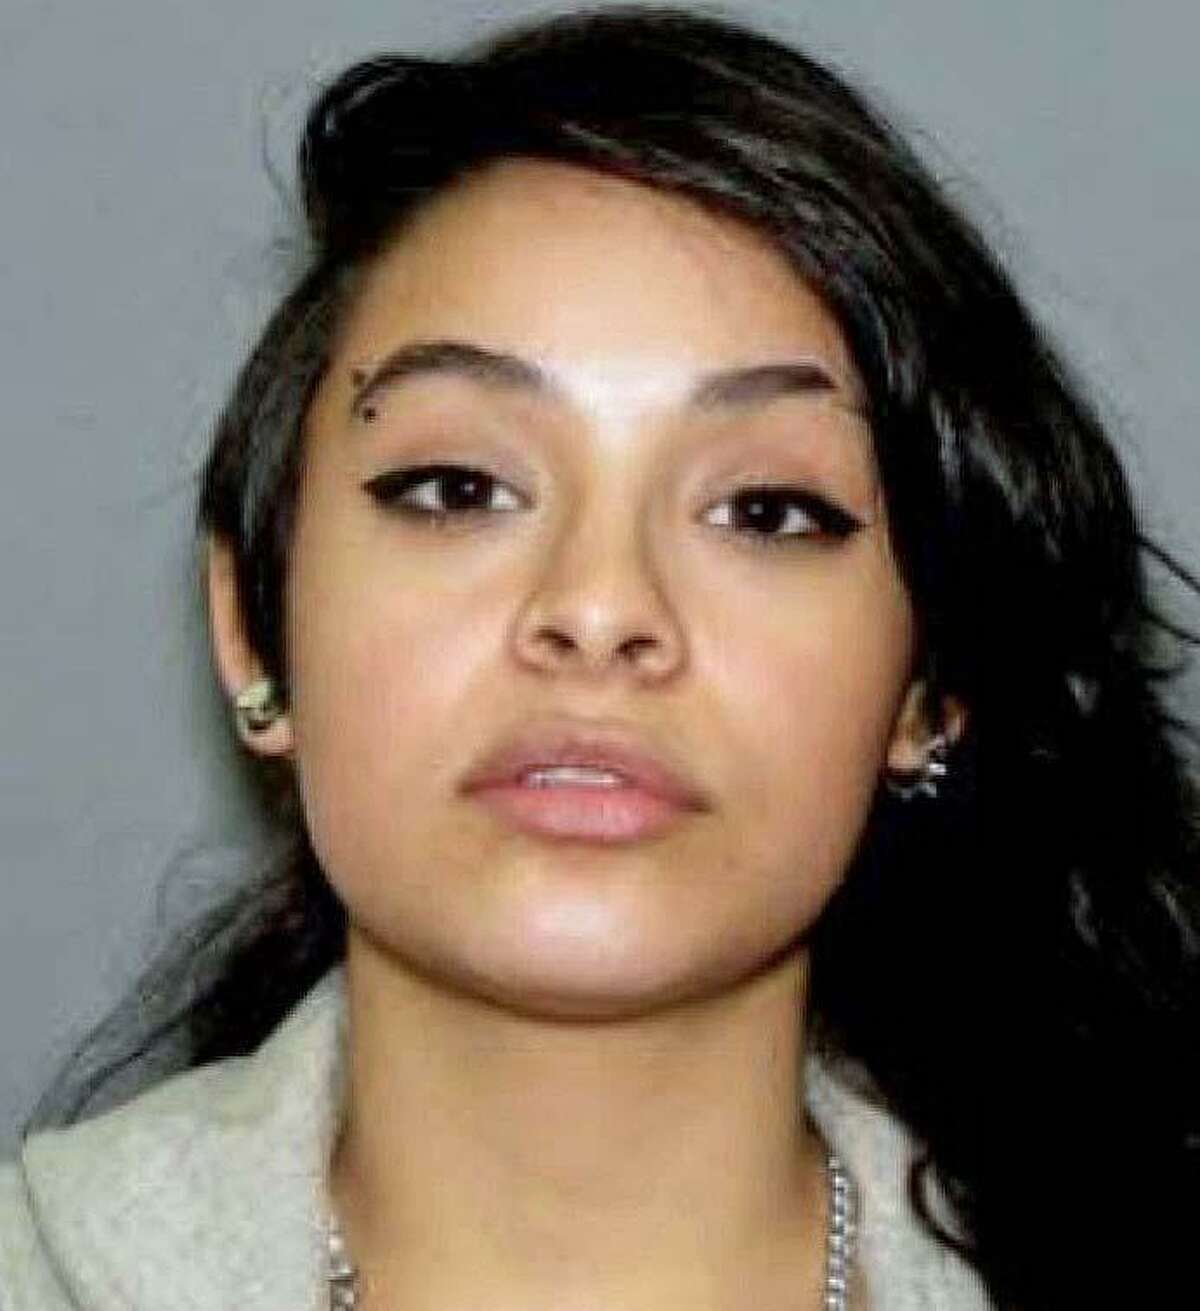 This photo of Valerie Reyes was posted by New Yok City police from the Midtown North precinct. The missing person poster said “Have you seen VALERIE REYES? 5' 3", black hair, brown eyes, 1/2 sleeve tattoo on left arm. Last seen wearing a green coat, black jeans, and black shoes. Suffers from anxiety and depression.”